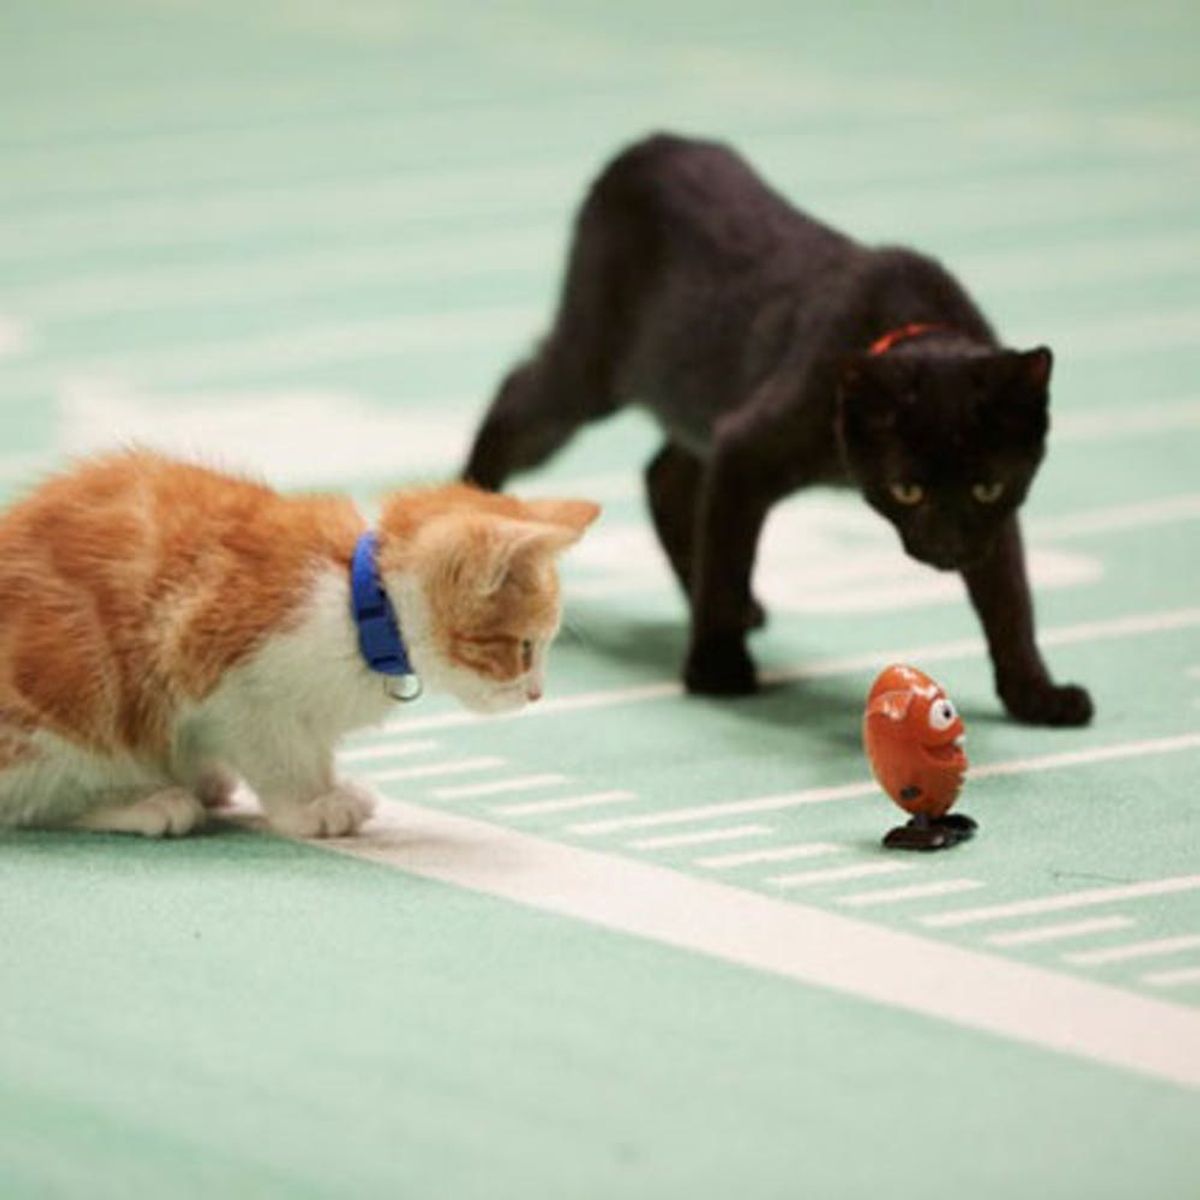 The Kitten Bowl = A Purr-fect Lineup of All-Star Cat-letes